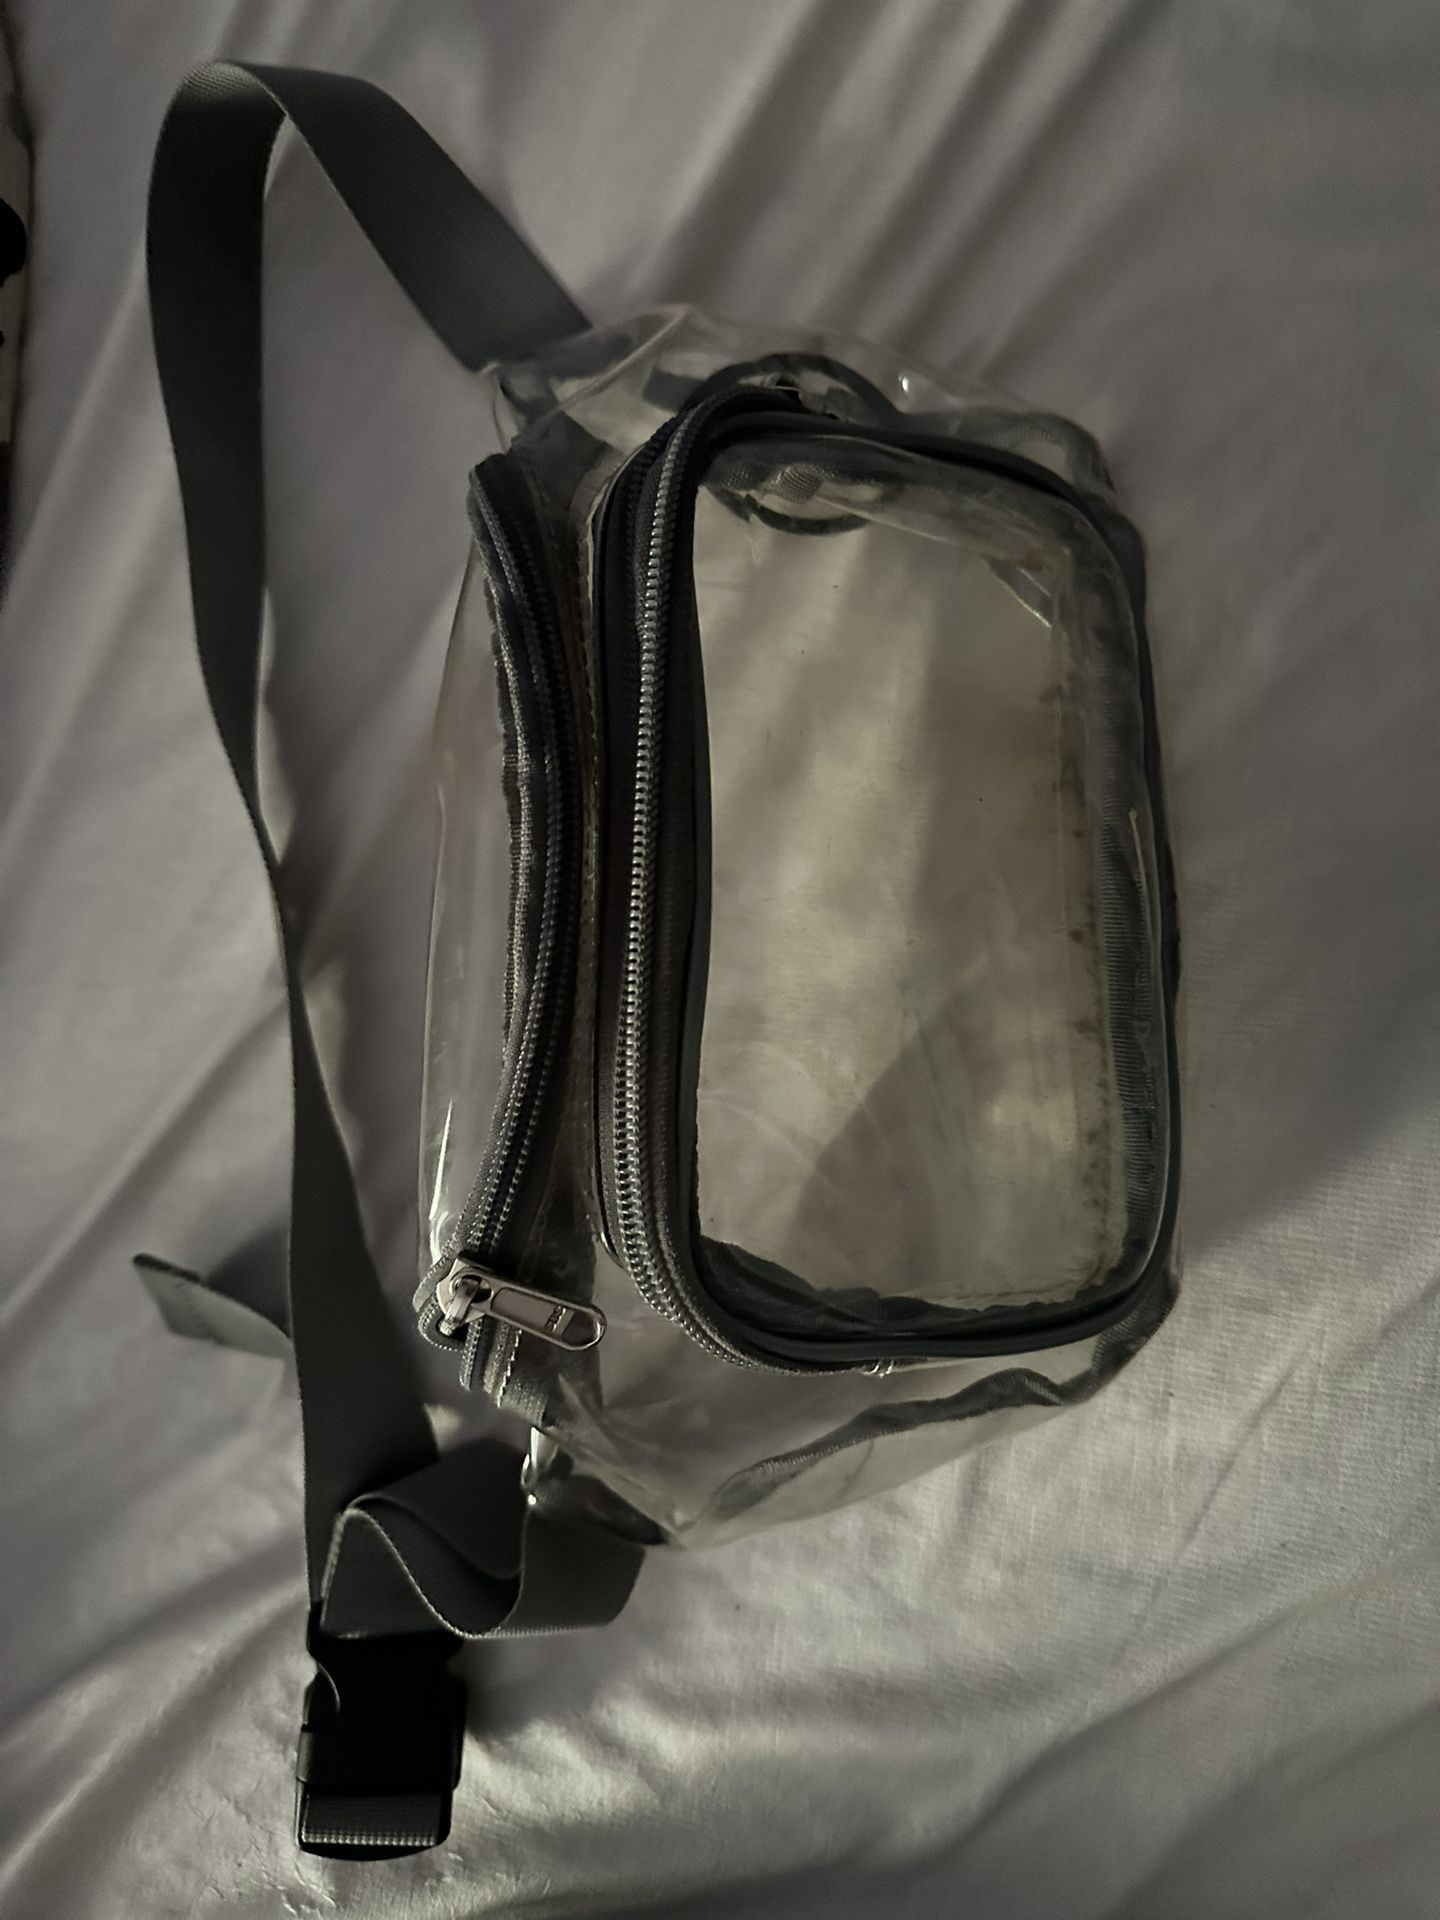 Clear Bag for Girls Transparent Waist Pack Stadium Concert Approved See-thru Pouch Waterproof Purse Gray